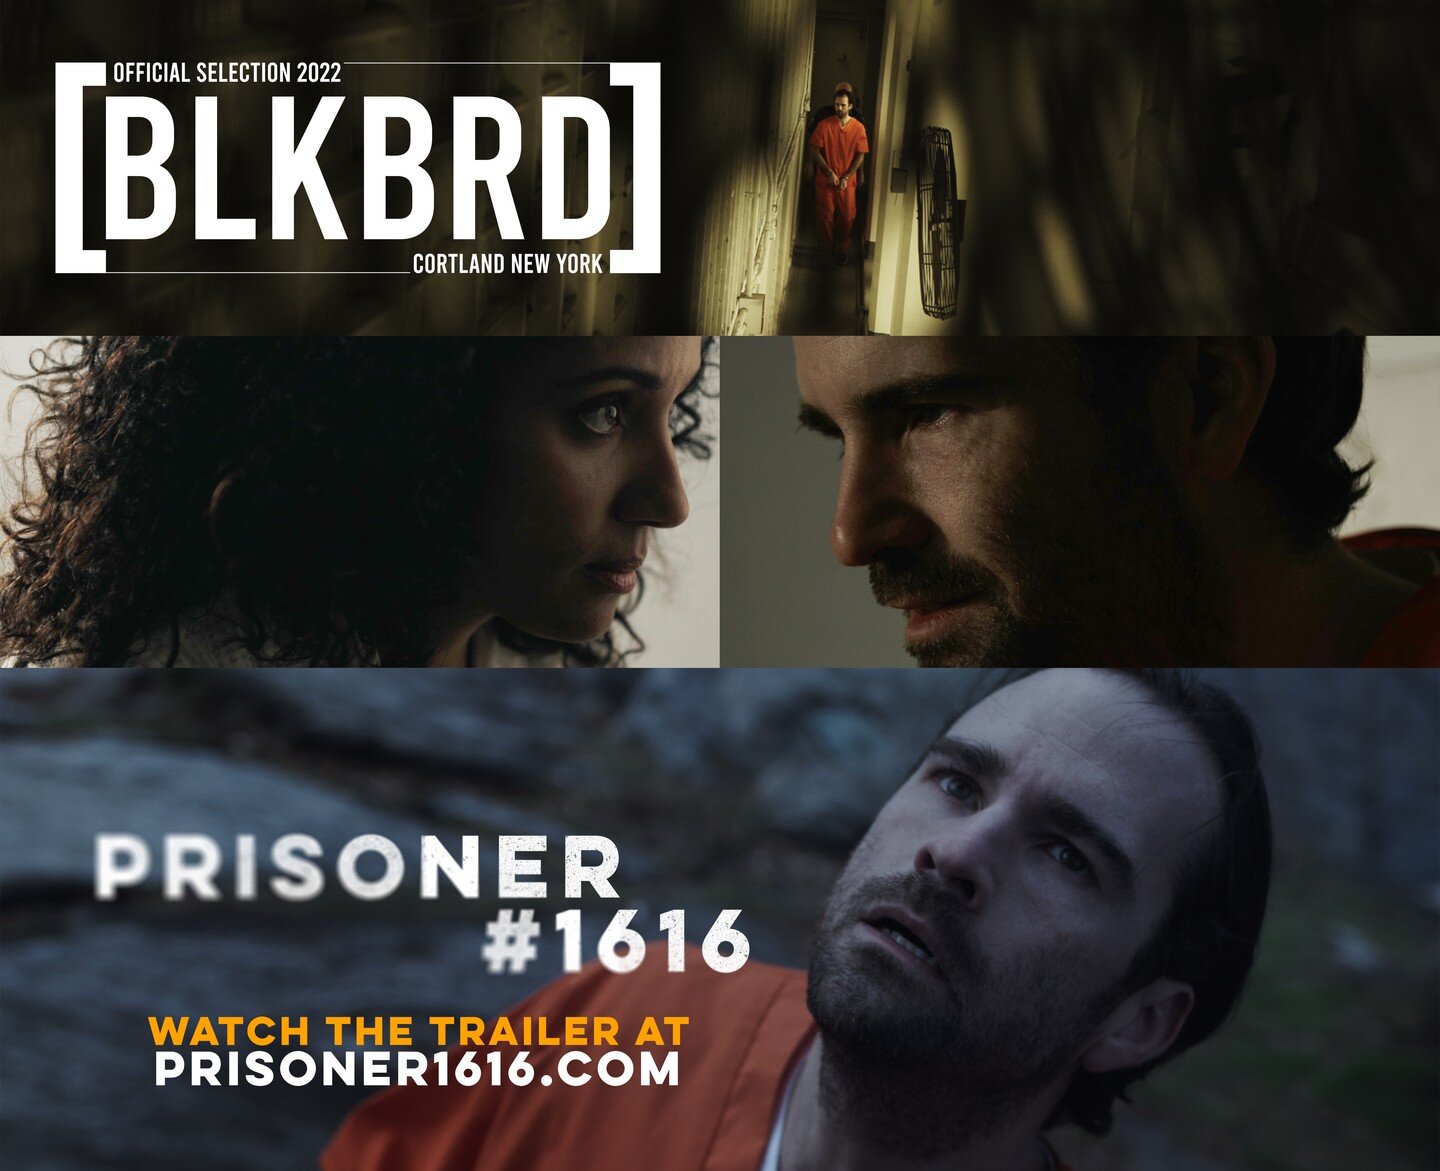 We cannot wait for @blackbirdfilmfest this week! In Cortland, NY #prisoner1616 will play on Friday May 20th!

#filmmaker #filmmaking #film #onlinepremiere #cinematography #director #cinema #movie #cinematographer #movies #actor #filmmakers #video #sh